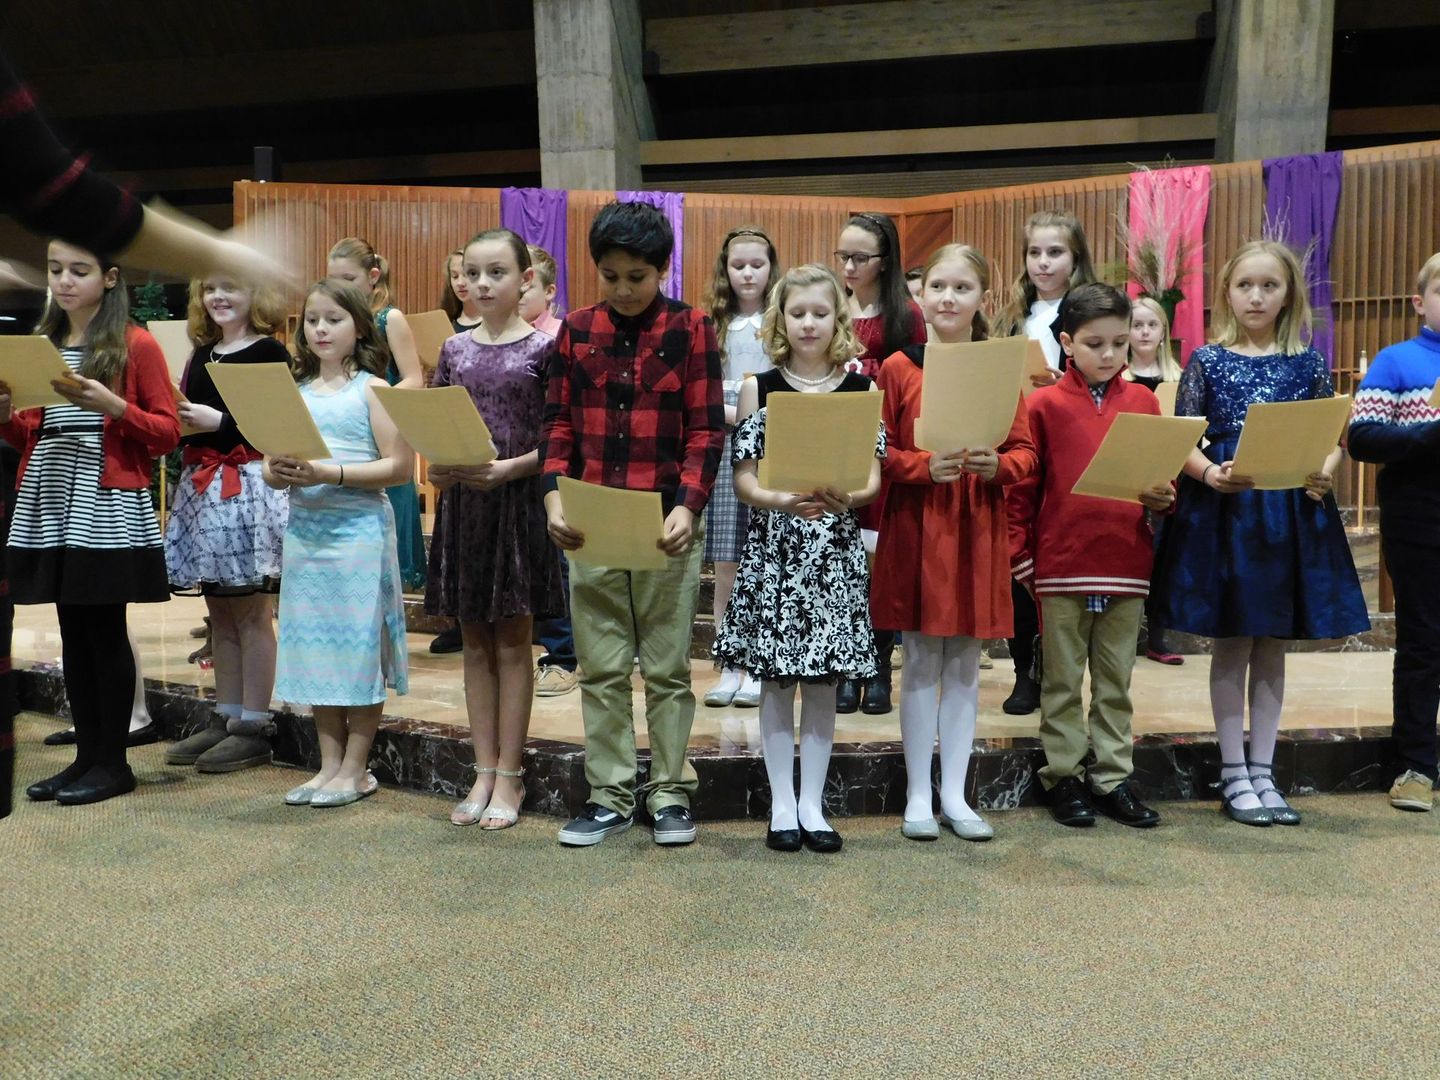 A group of children are singing together in a choir